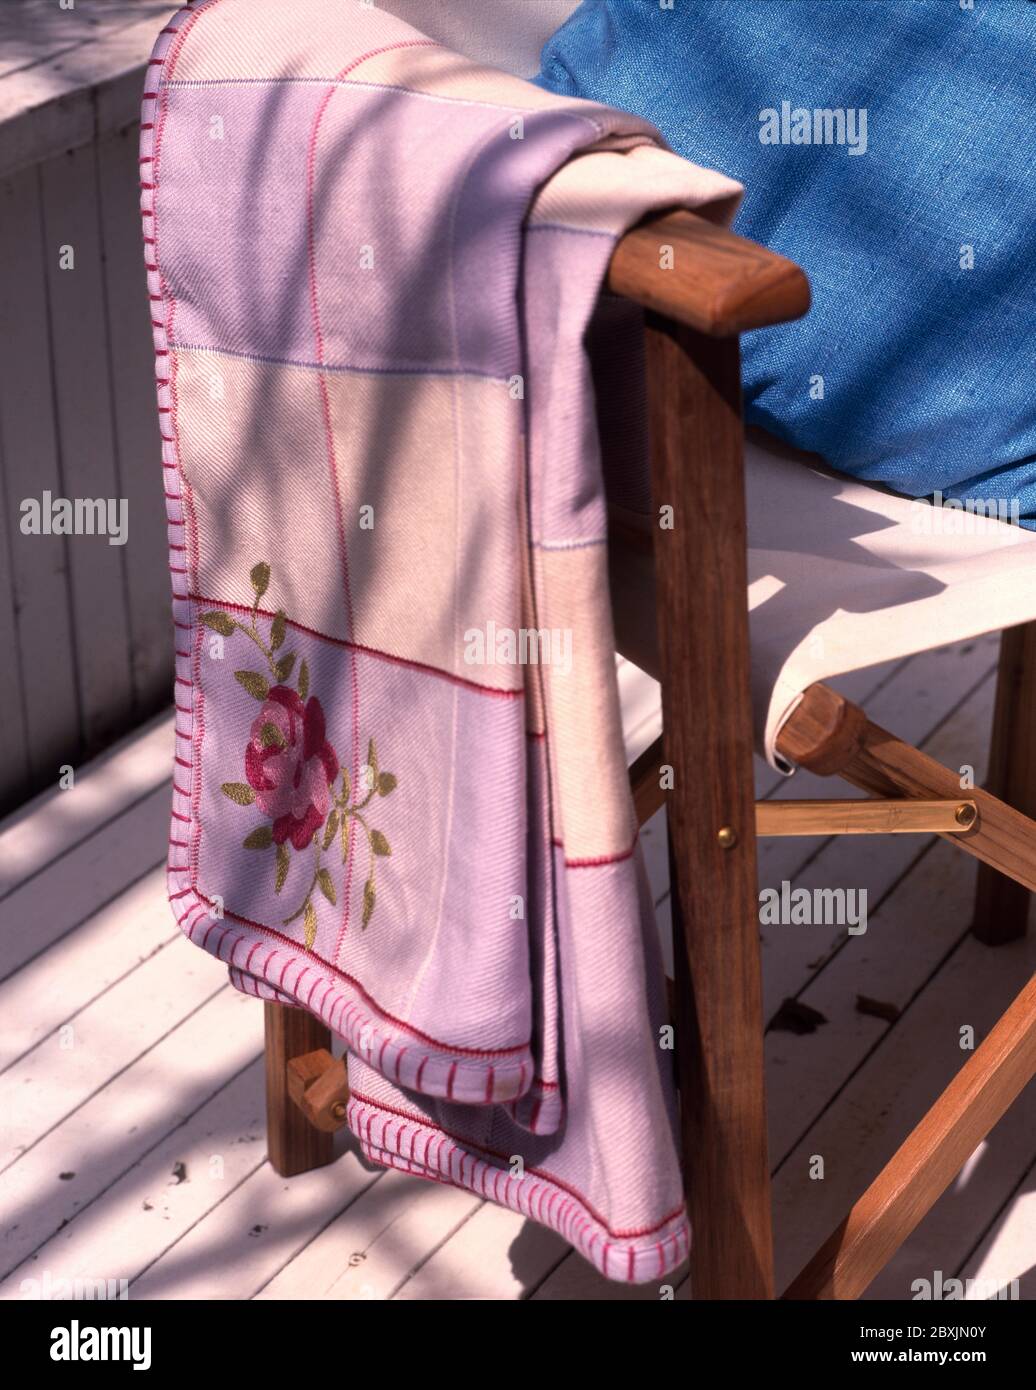 Embroidered throw over arm of deckchair Stock Photo